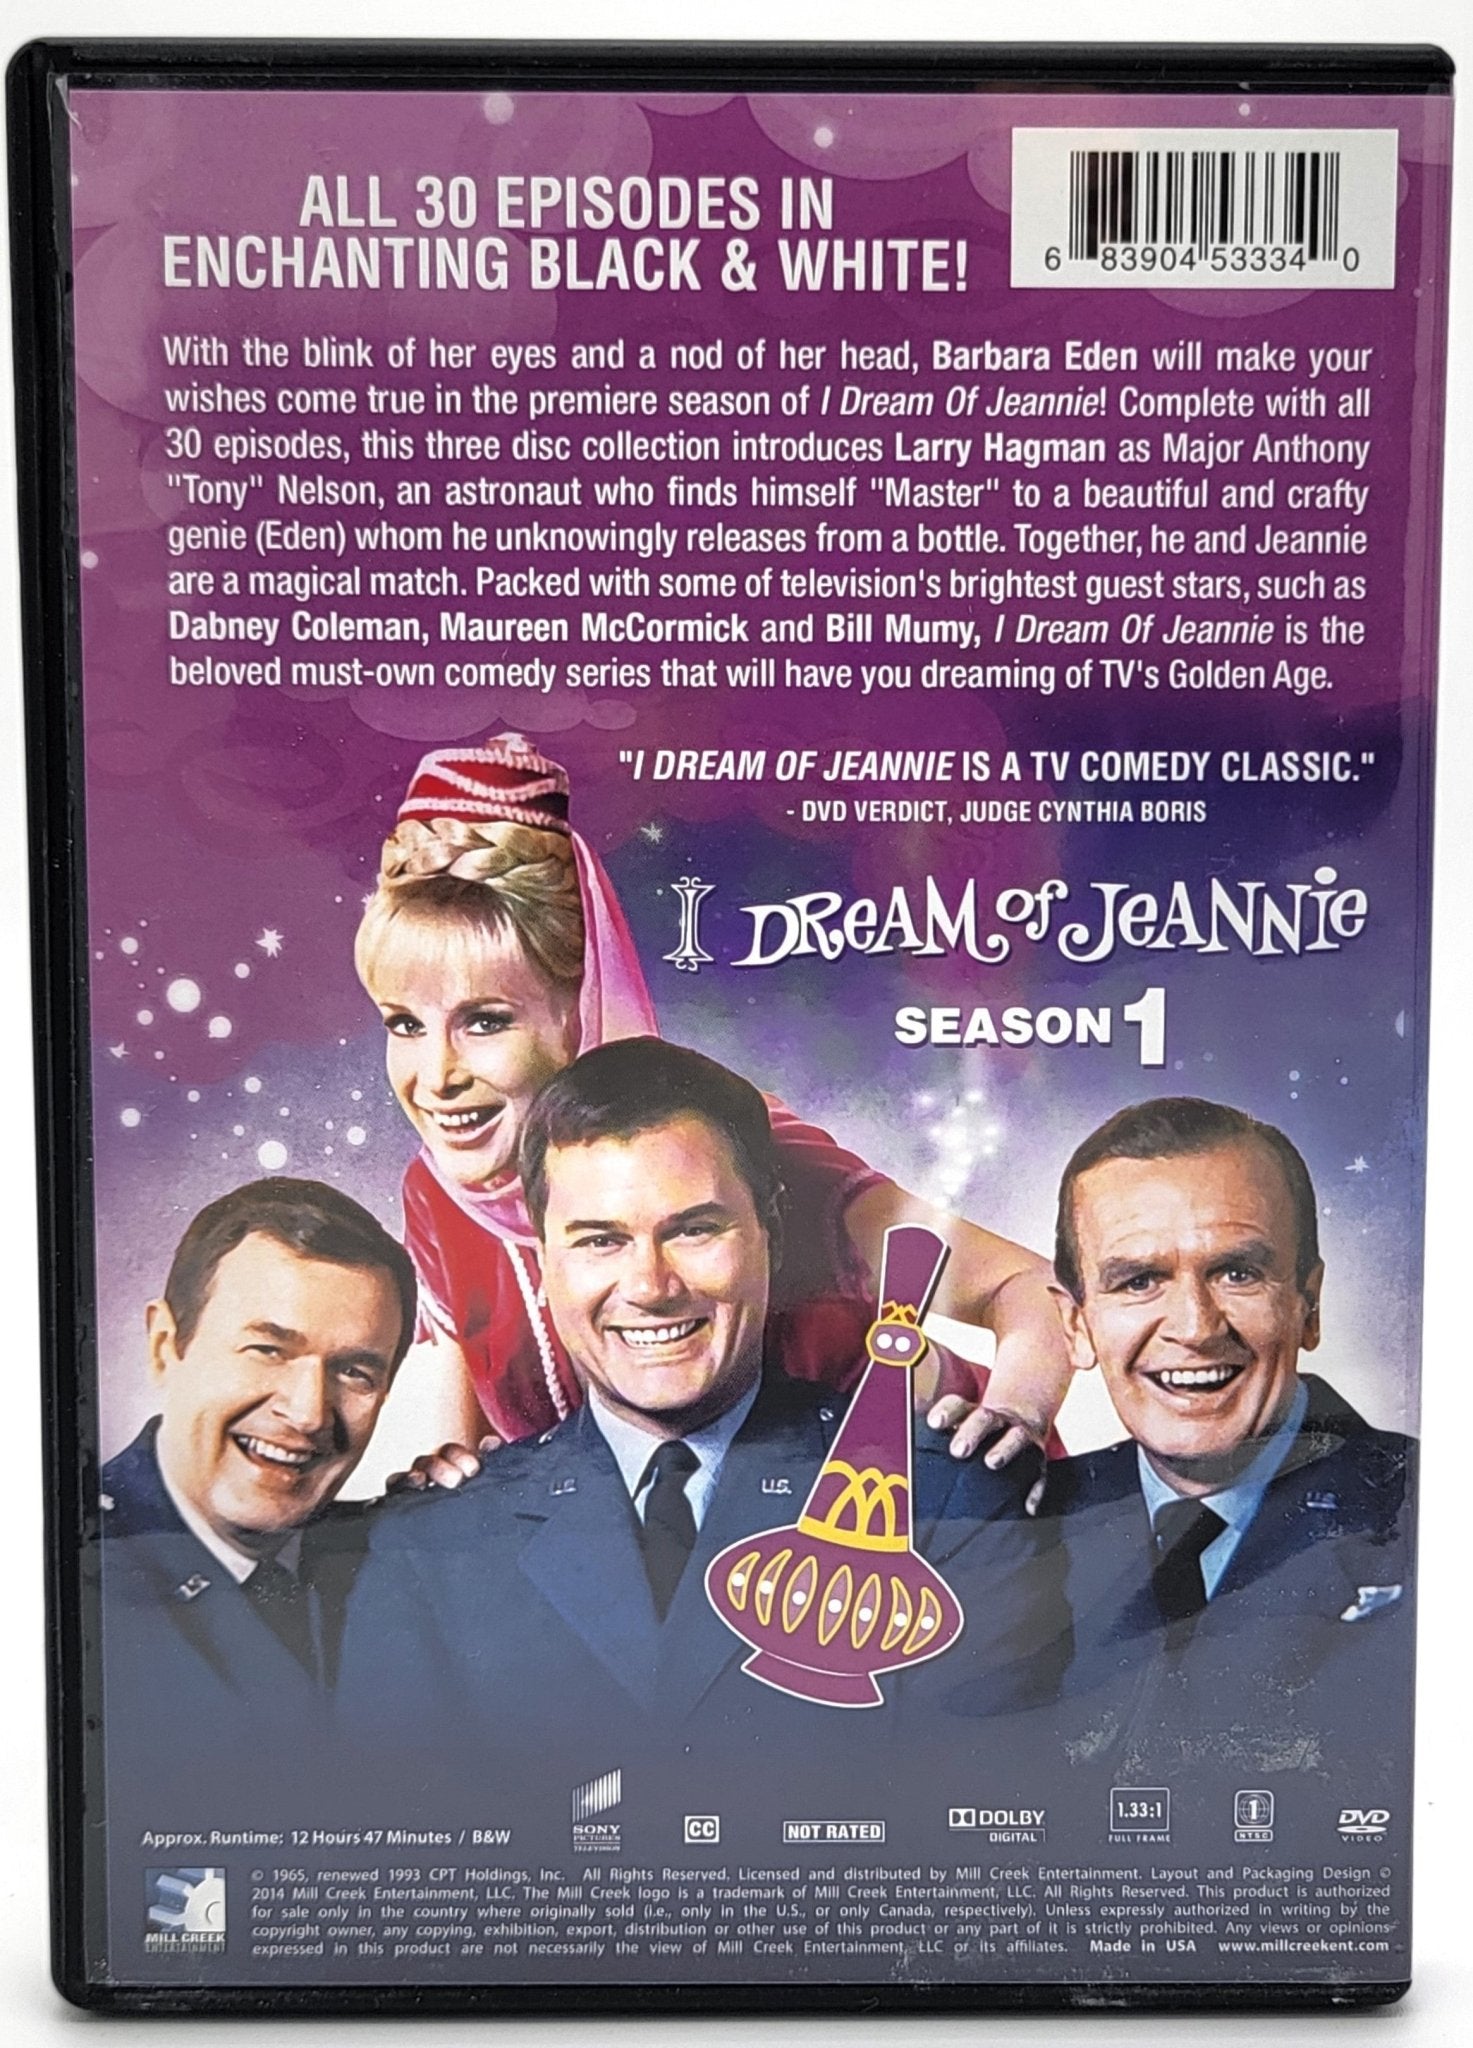 Sony Pictures Home Entertainment - I Dream of Jeannie | DVD | Season 1 | 3 Disc Set - DVD - Steady Bunny Shop